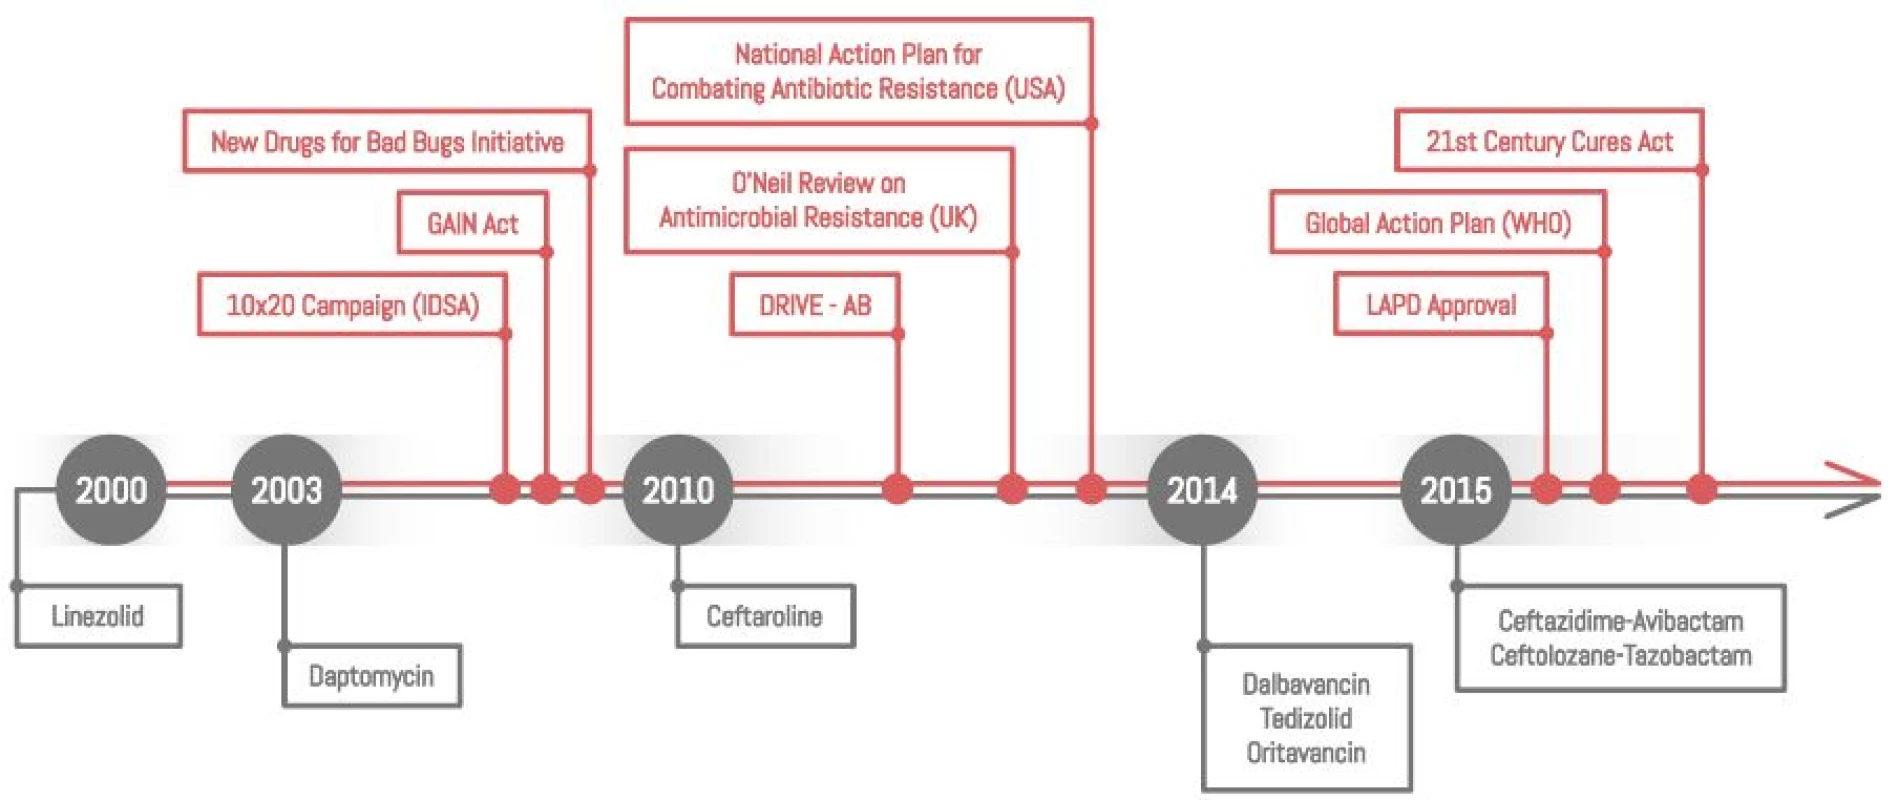 The antibiotics timeline since 2000. Since 2000, only a small number of antibiotics have been approved (below the timeline). Recently efforts have broadened to enhance the potential pipeline and also to protect the antibiotics currently available (above the timeline), by incentives and legislation